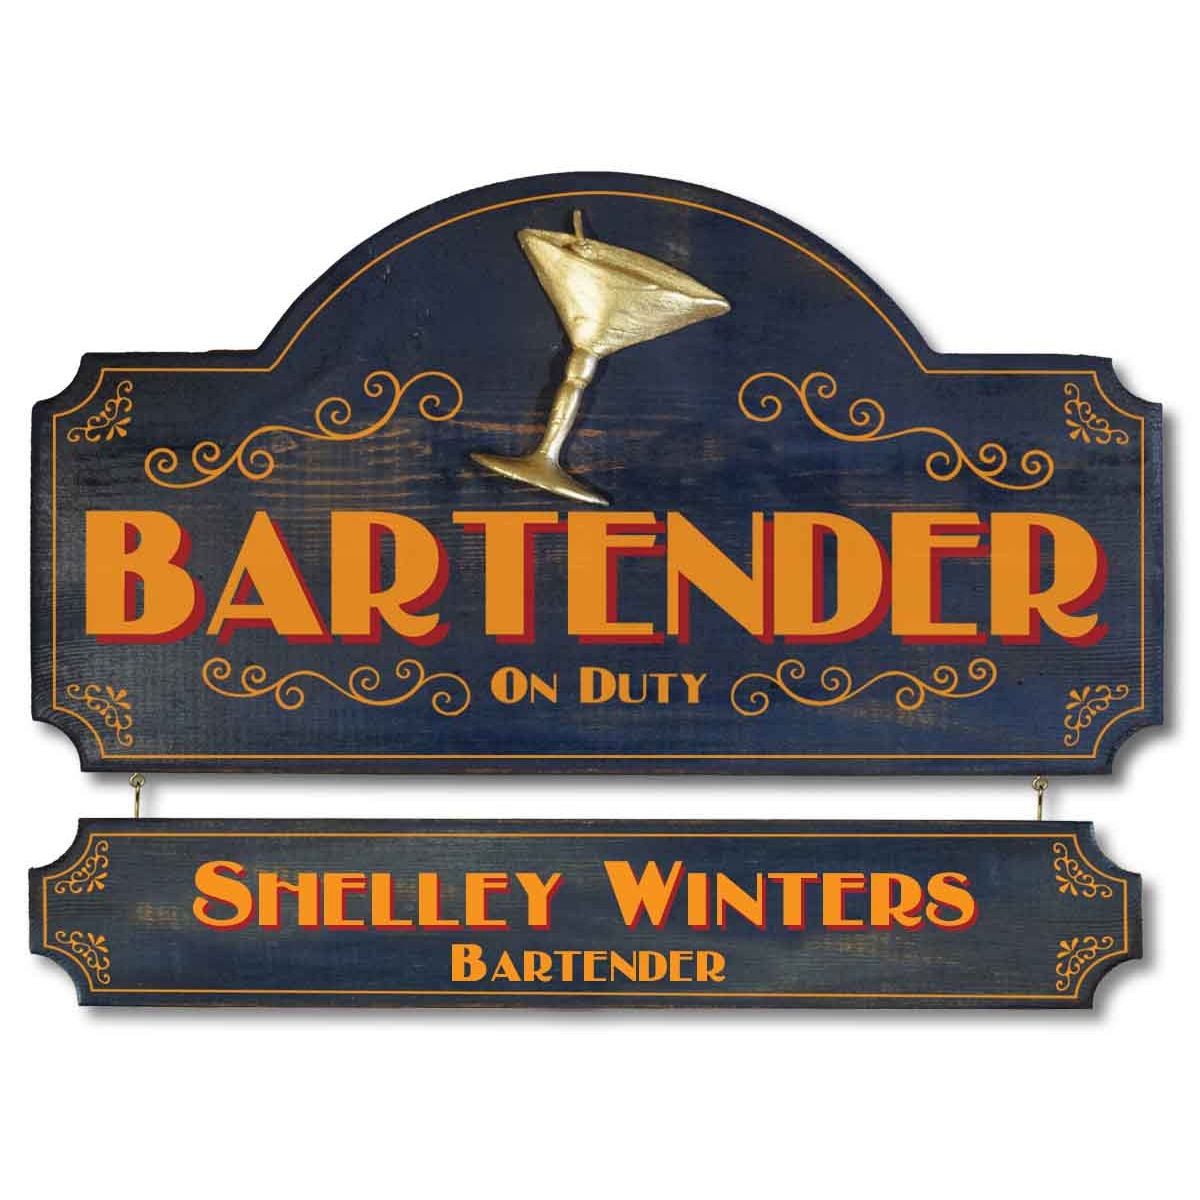 Bartender on duty wood sign cut to shape; blue with gold letters; custom nameplate